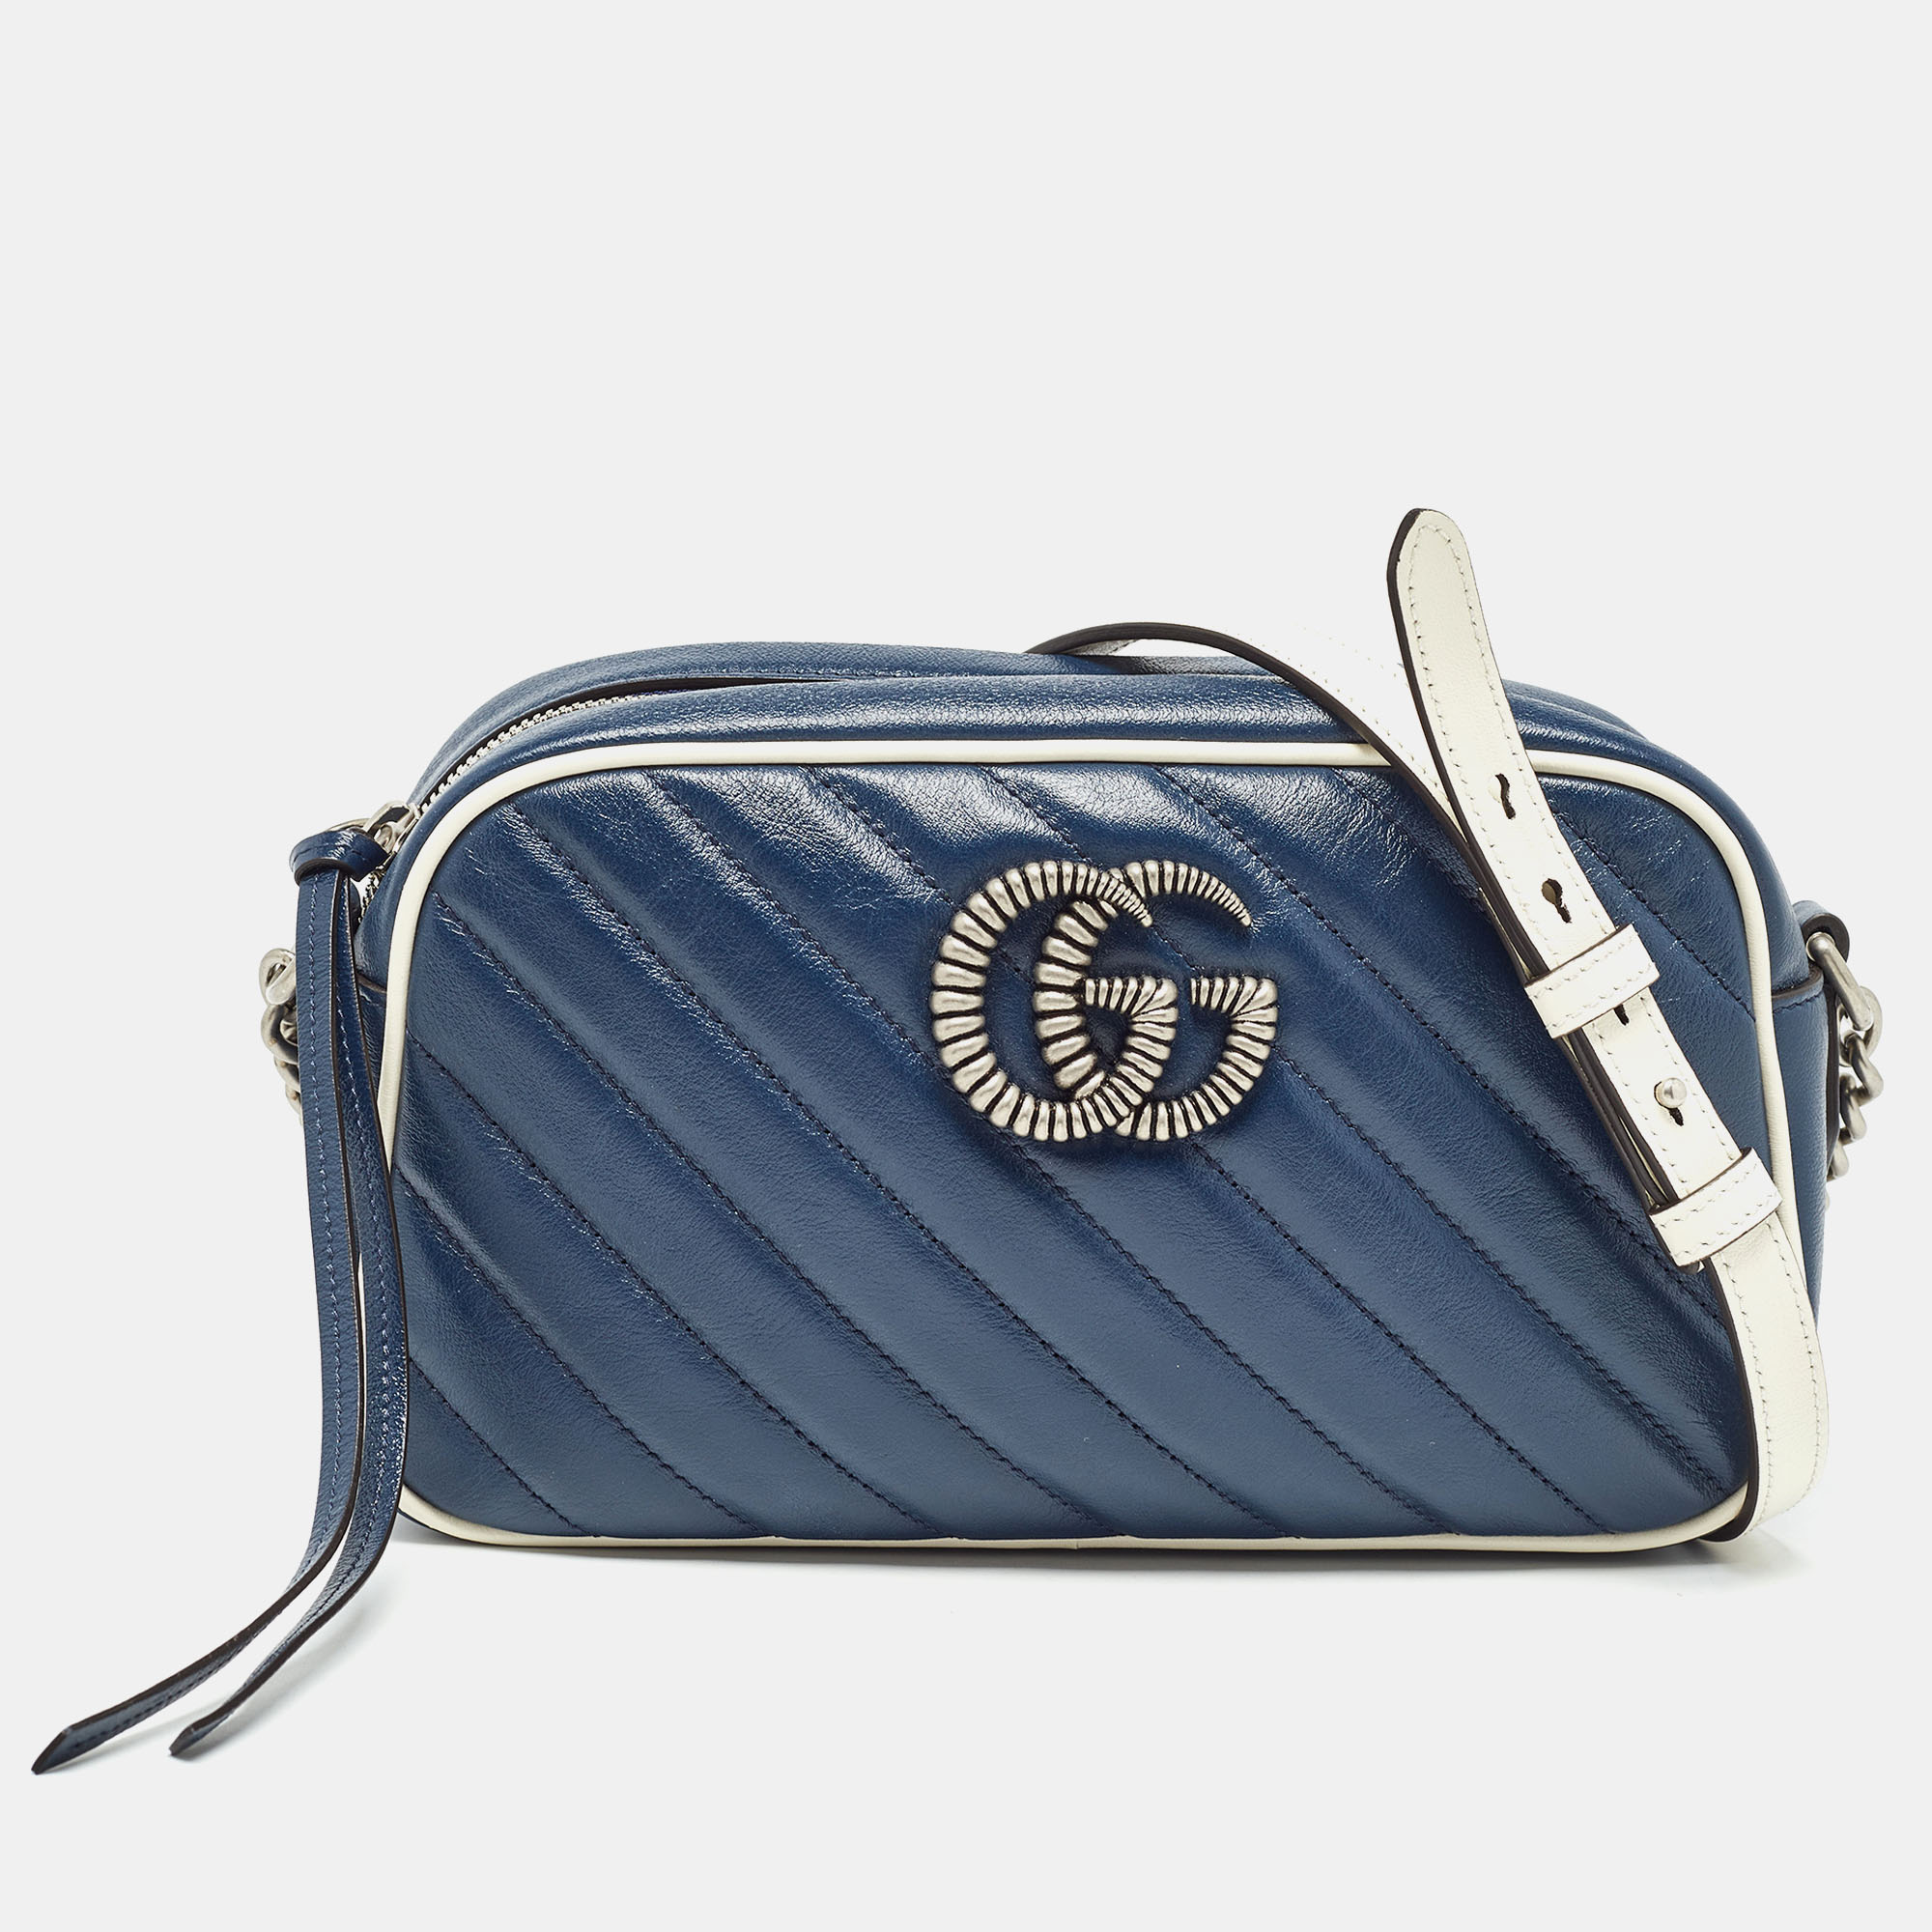 Gucci navy blue/white diagonal matelass&eacute; leather small gg marmont shoulder bag